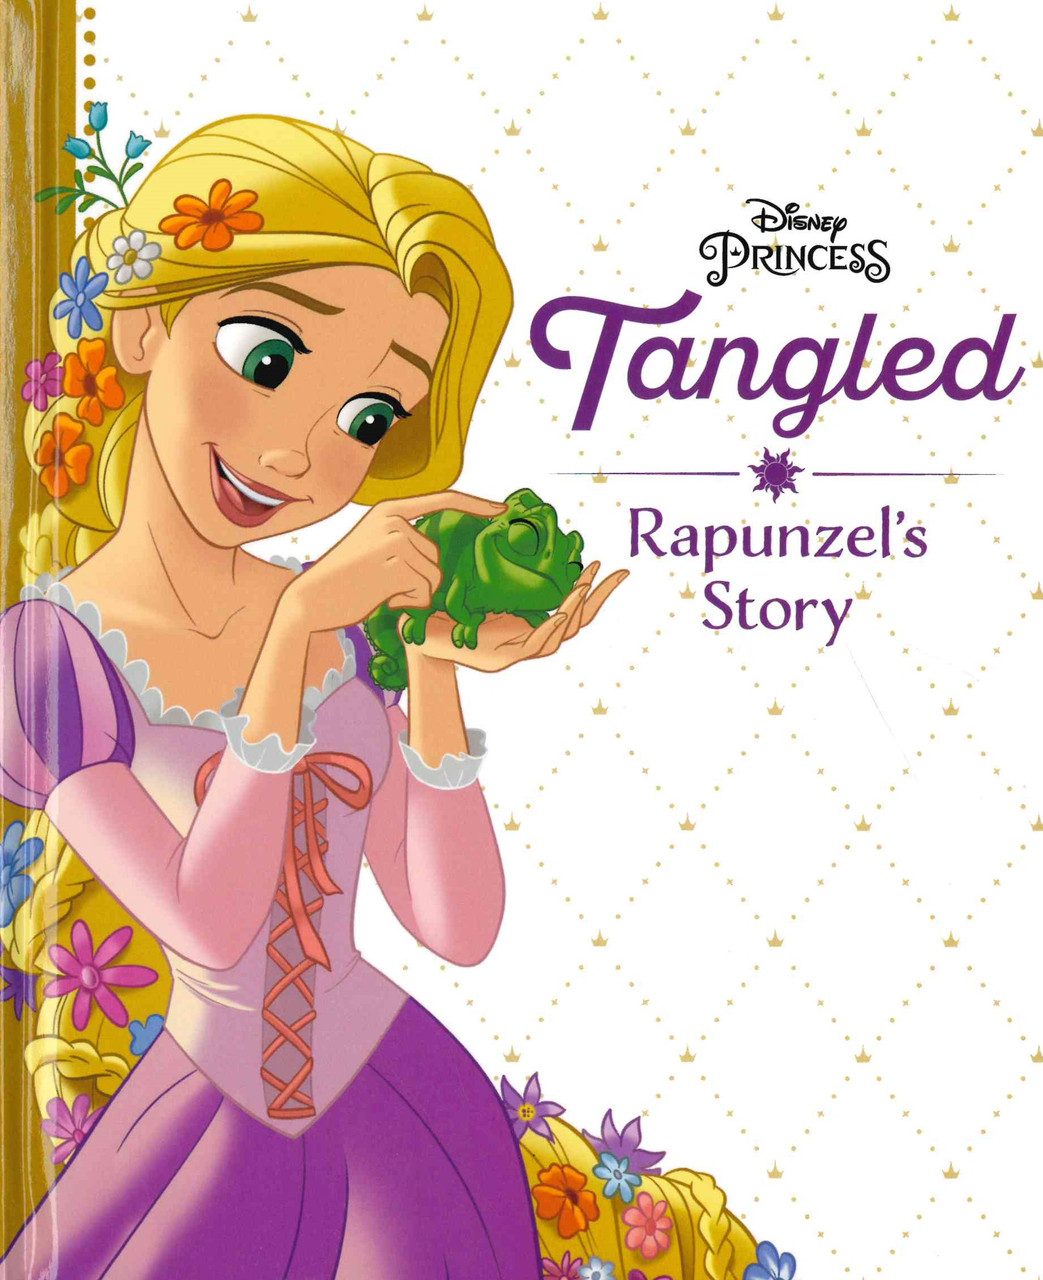 The True Tangled Sequel. Lately with Disney there has been a lot